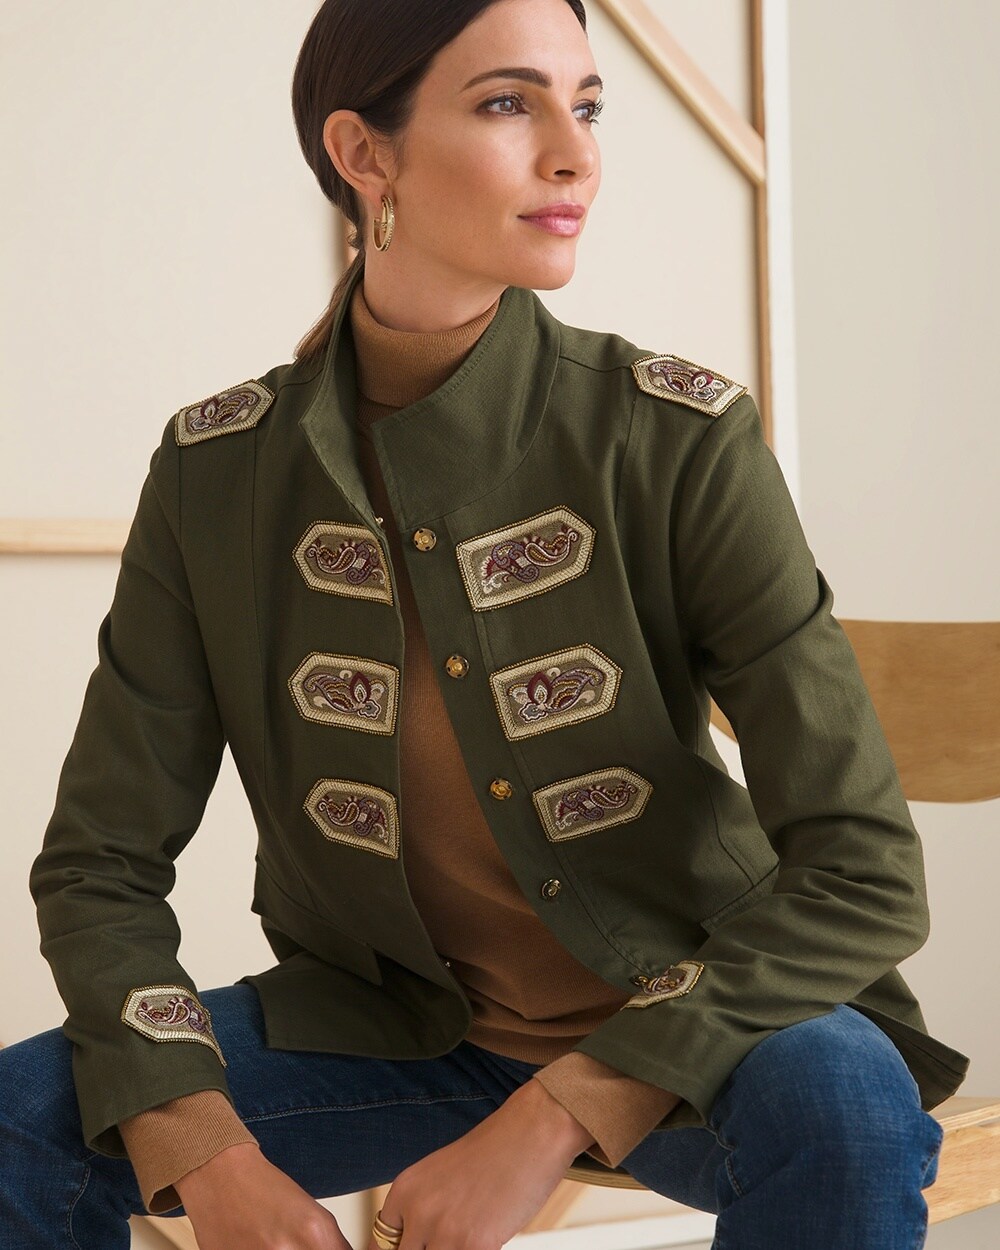 Womens Military Army Band Jacket